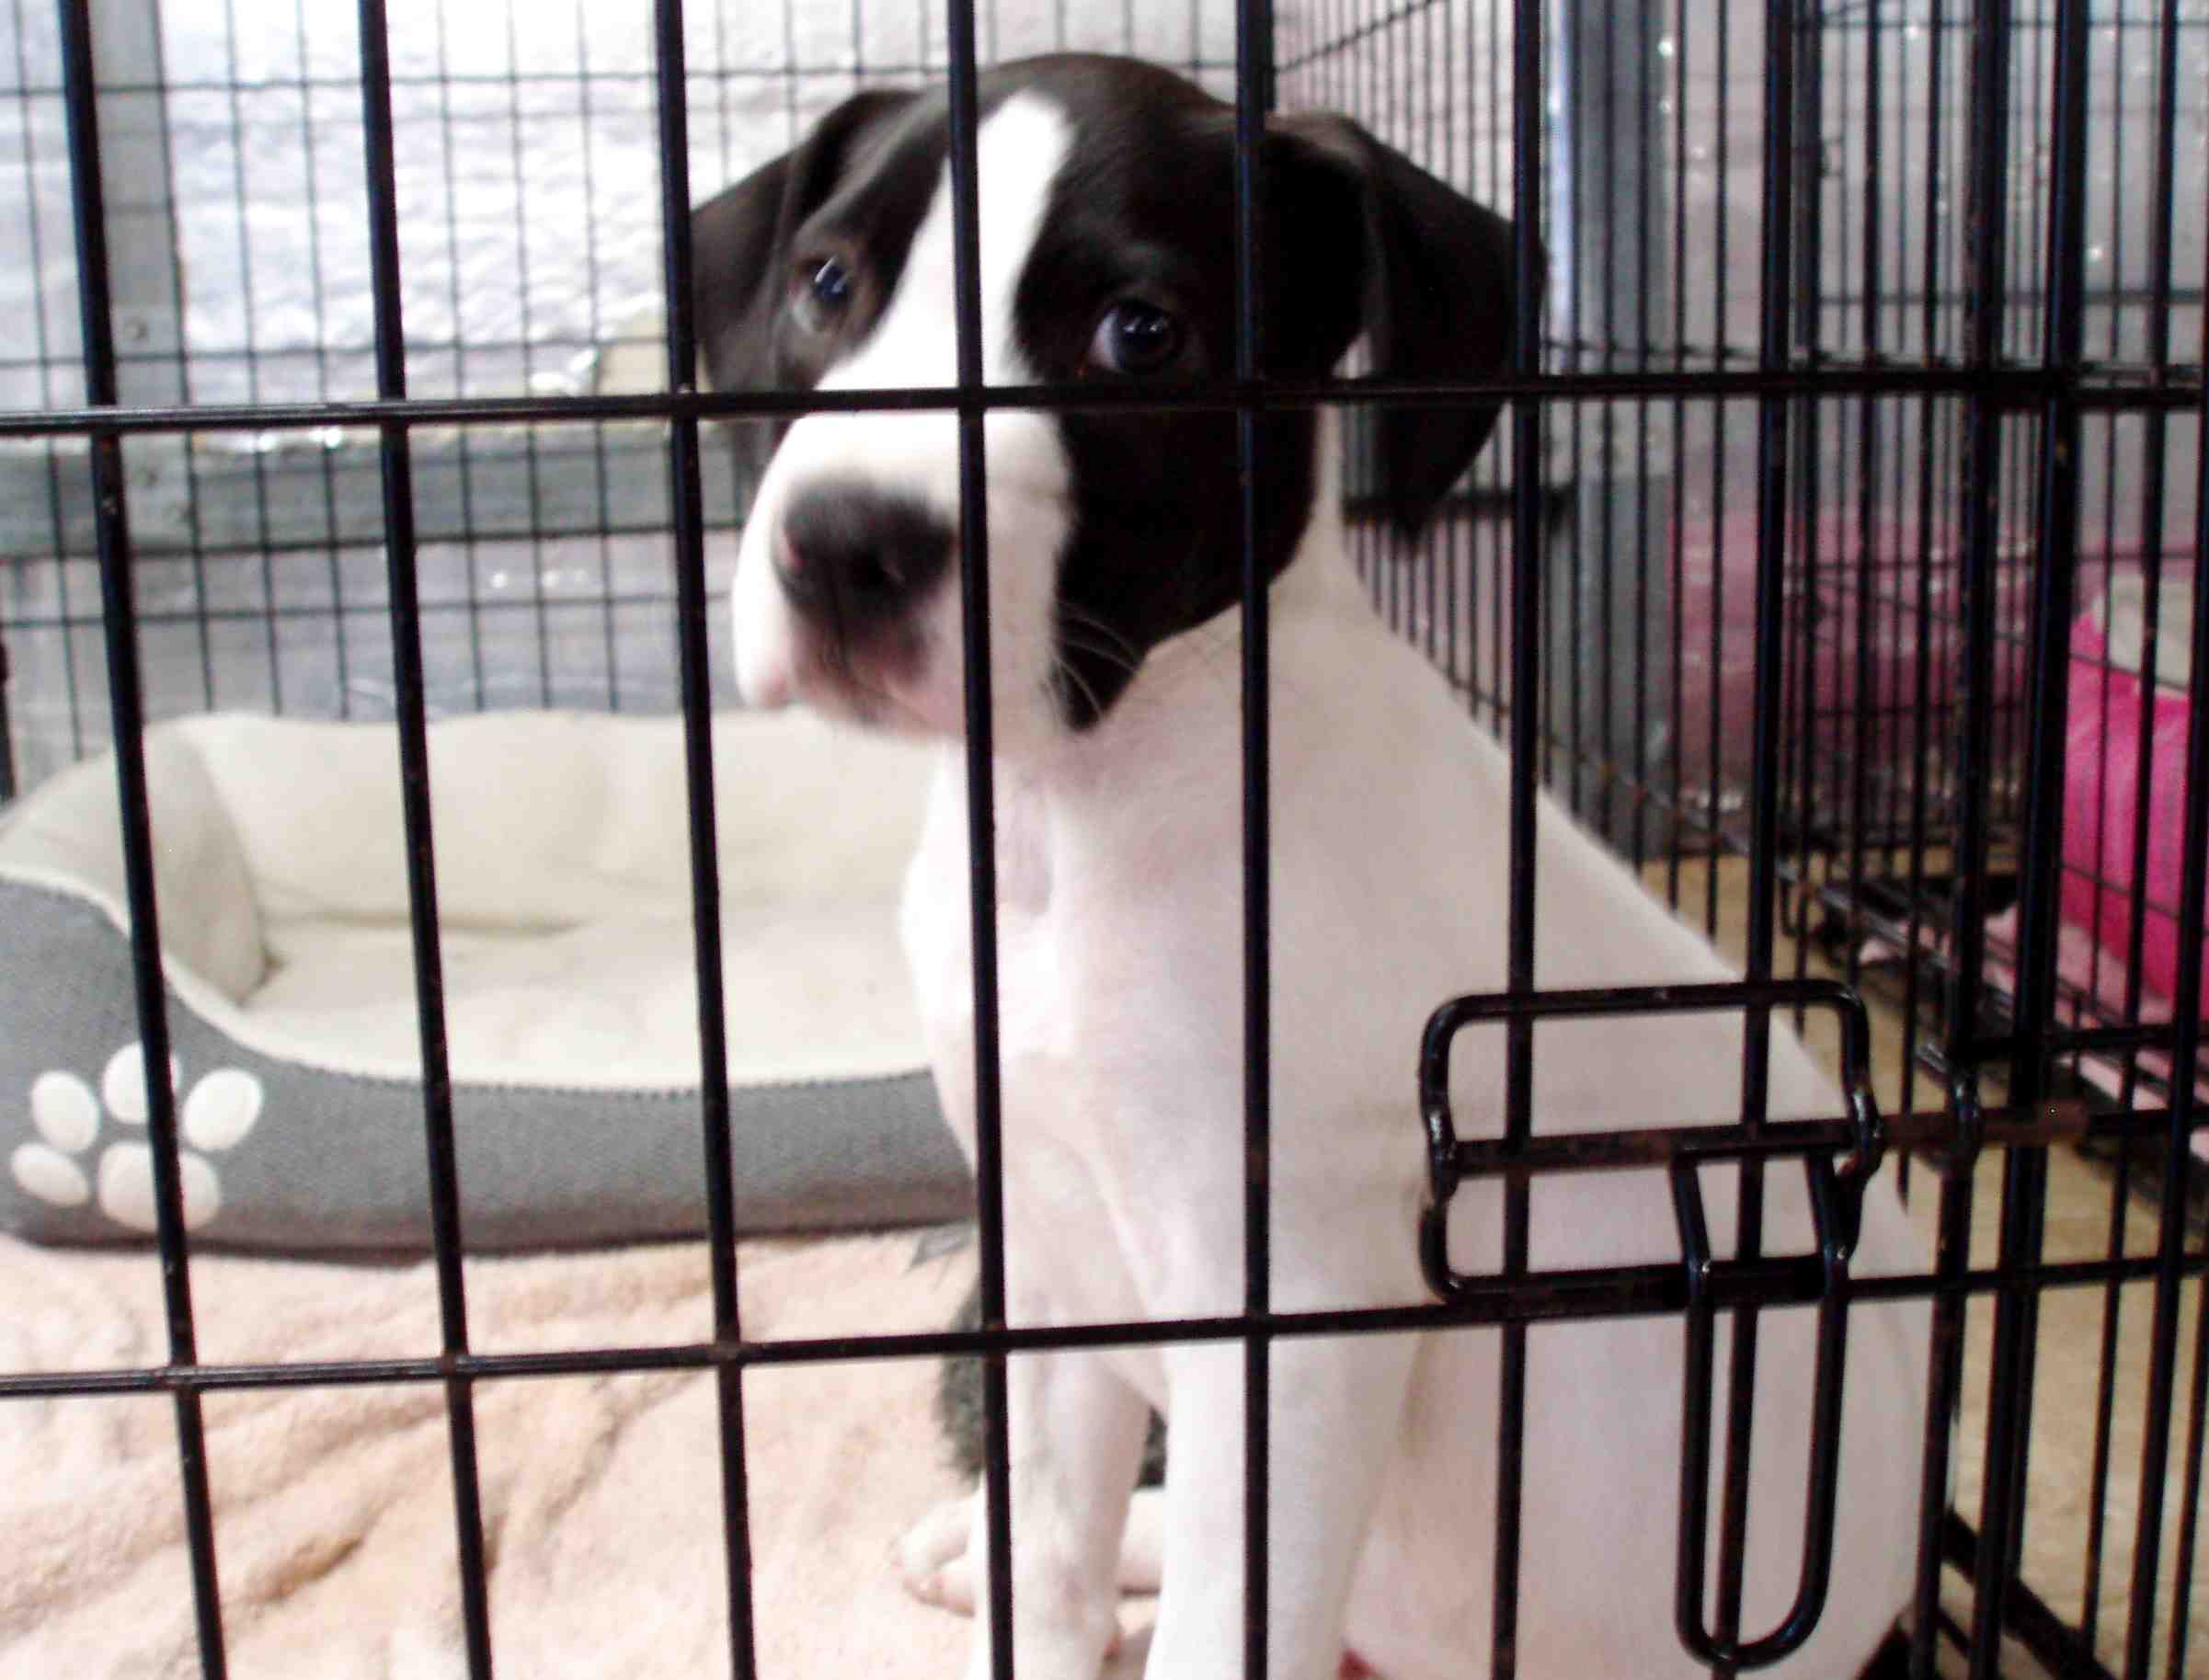 Sumter County Animal Services offers 10 good reasons to foster a dog or cat